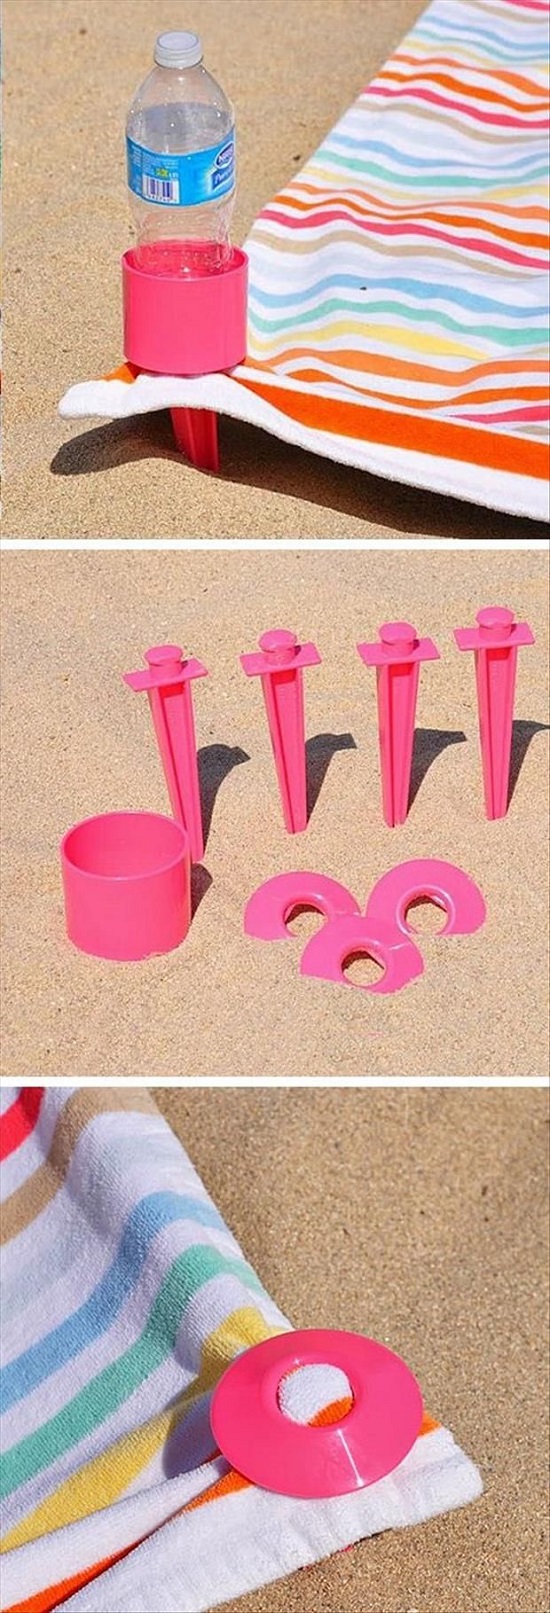 beach products7